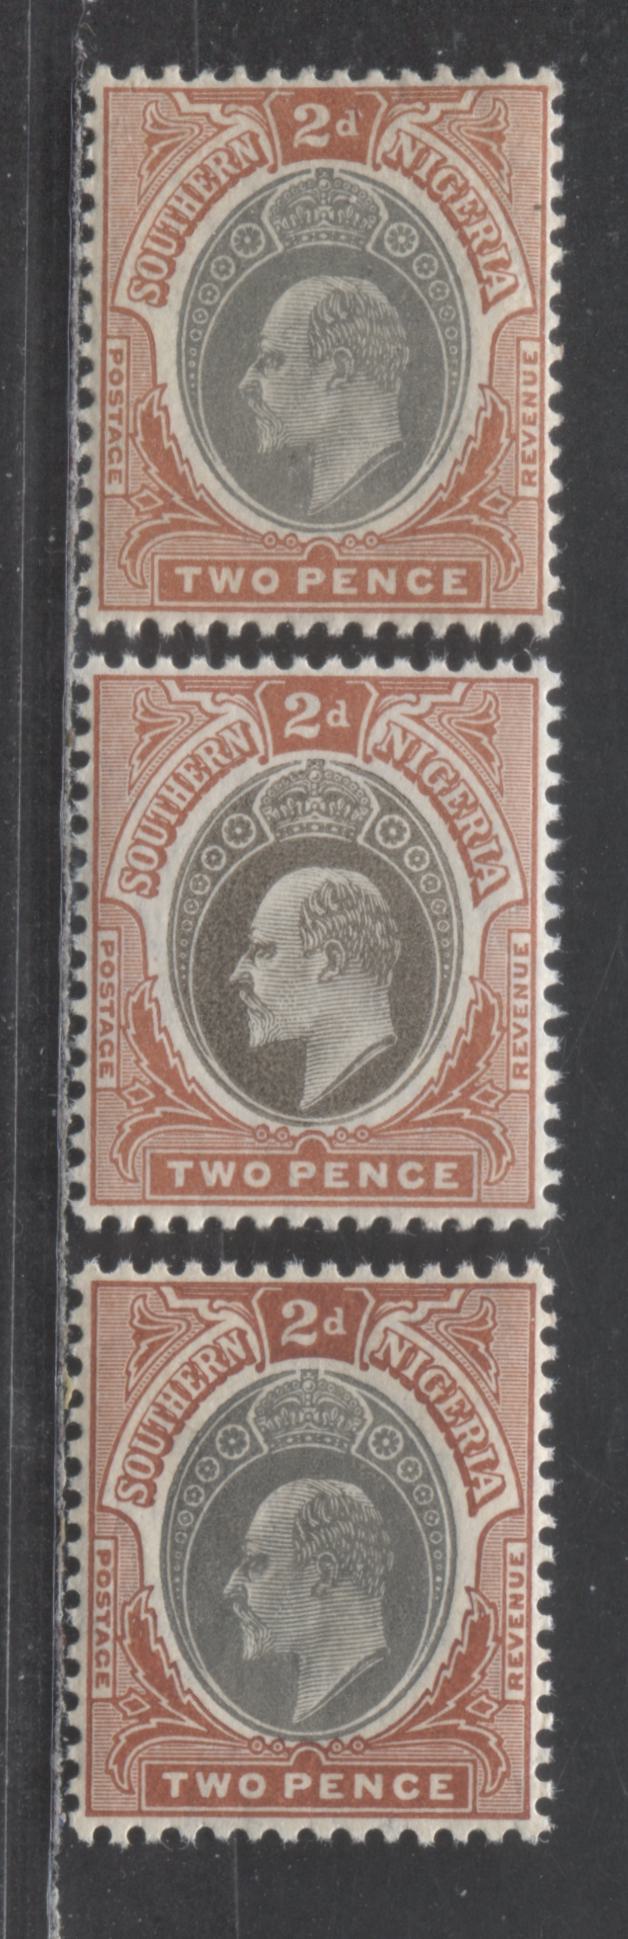 Lot 69A Southern Nigeria SC#23-23b 1904-1909 King Edward VII Issue, Multiple Crown CA Wmk, 3 VFNH Singles, Click on Listing to See ALL Pictures, Estimated Value $25 USD